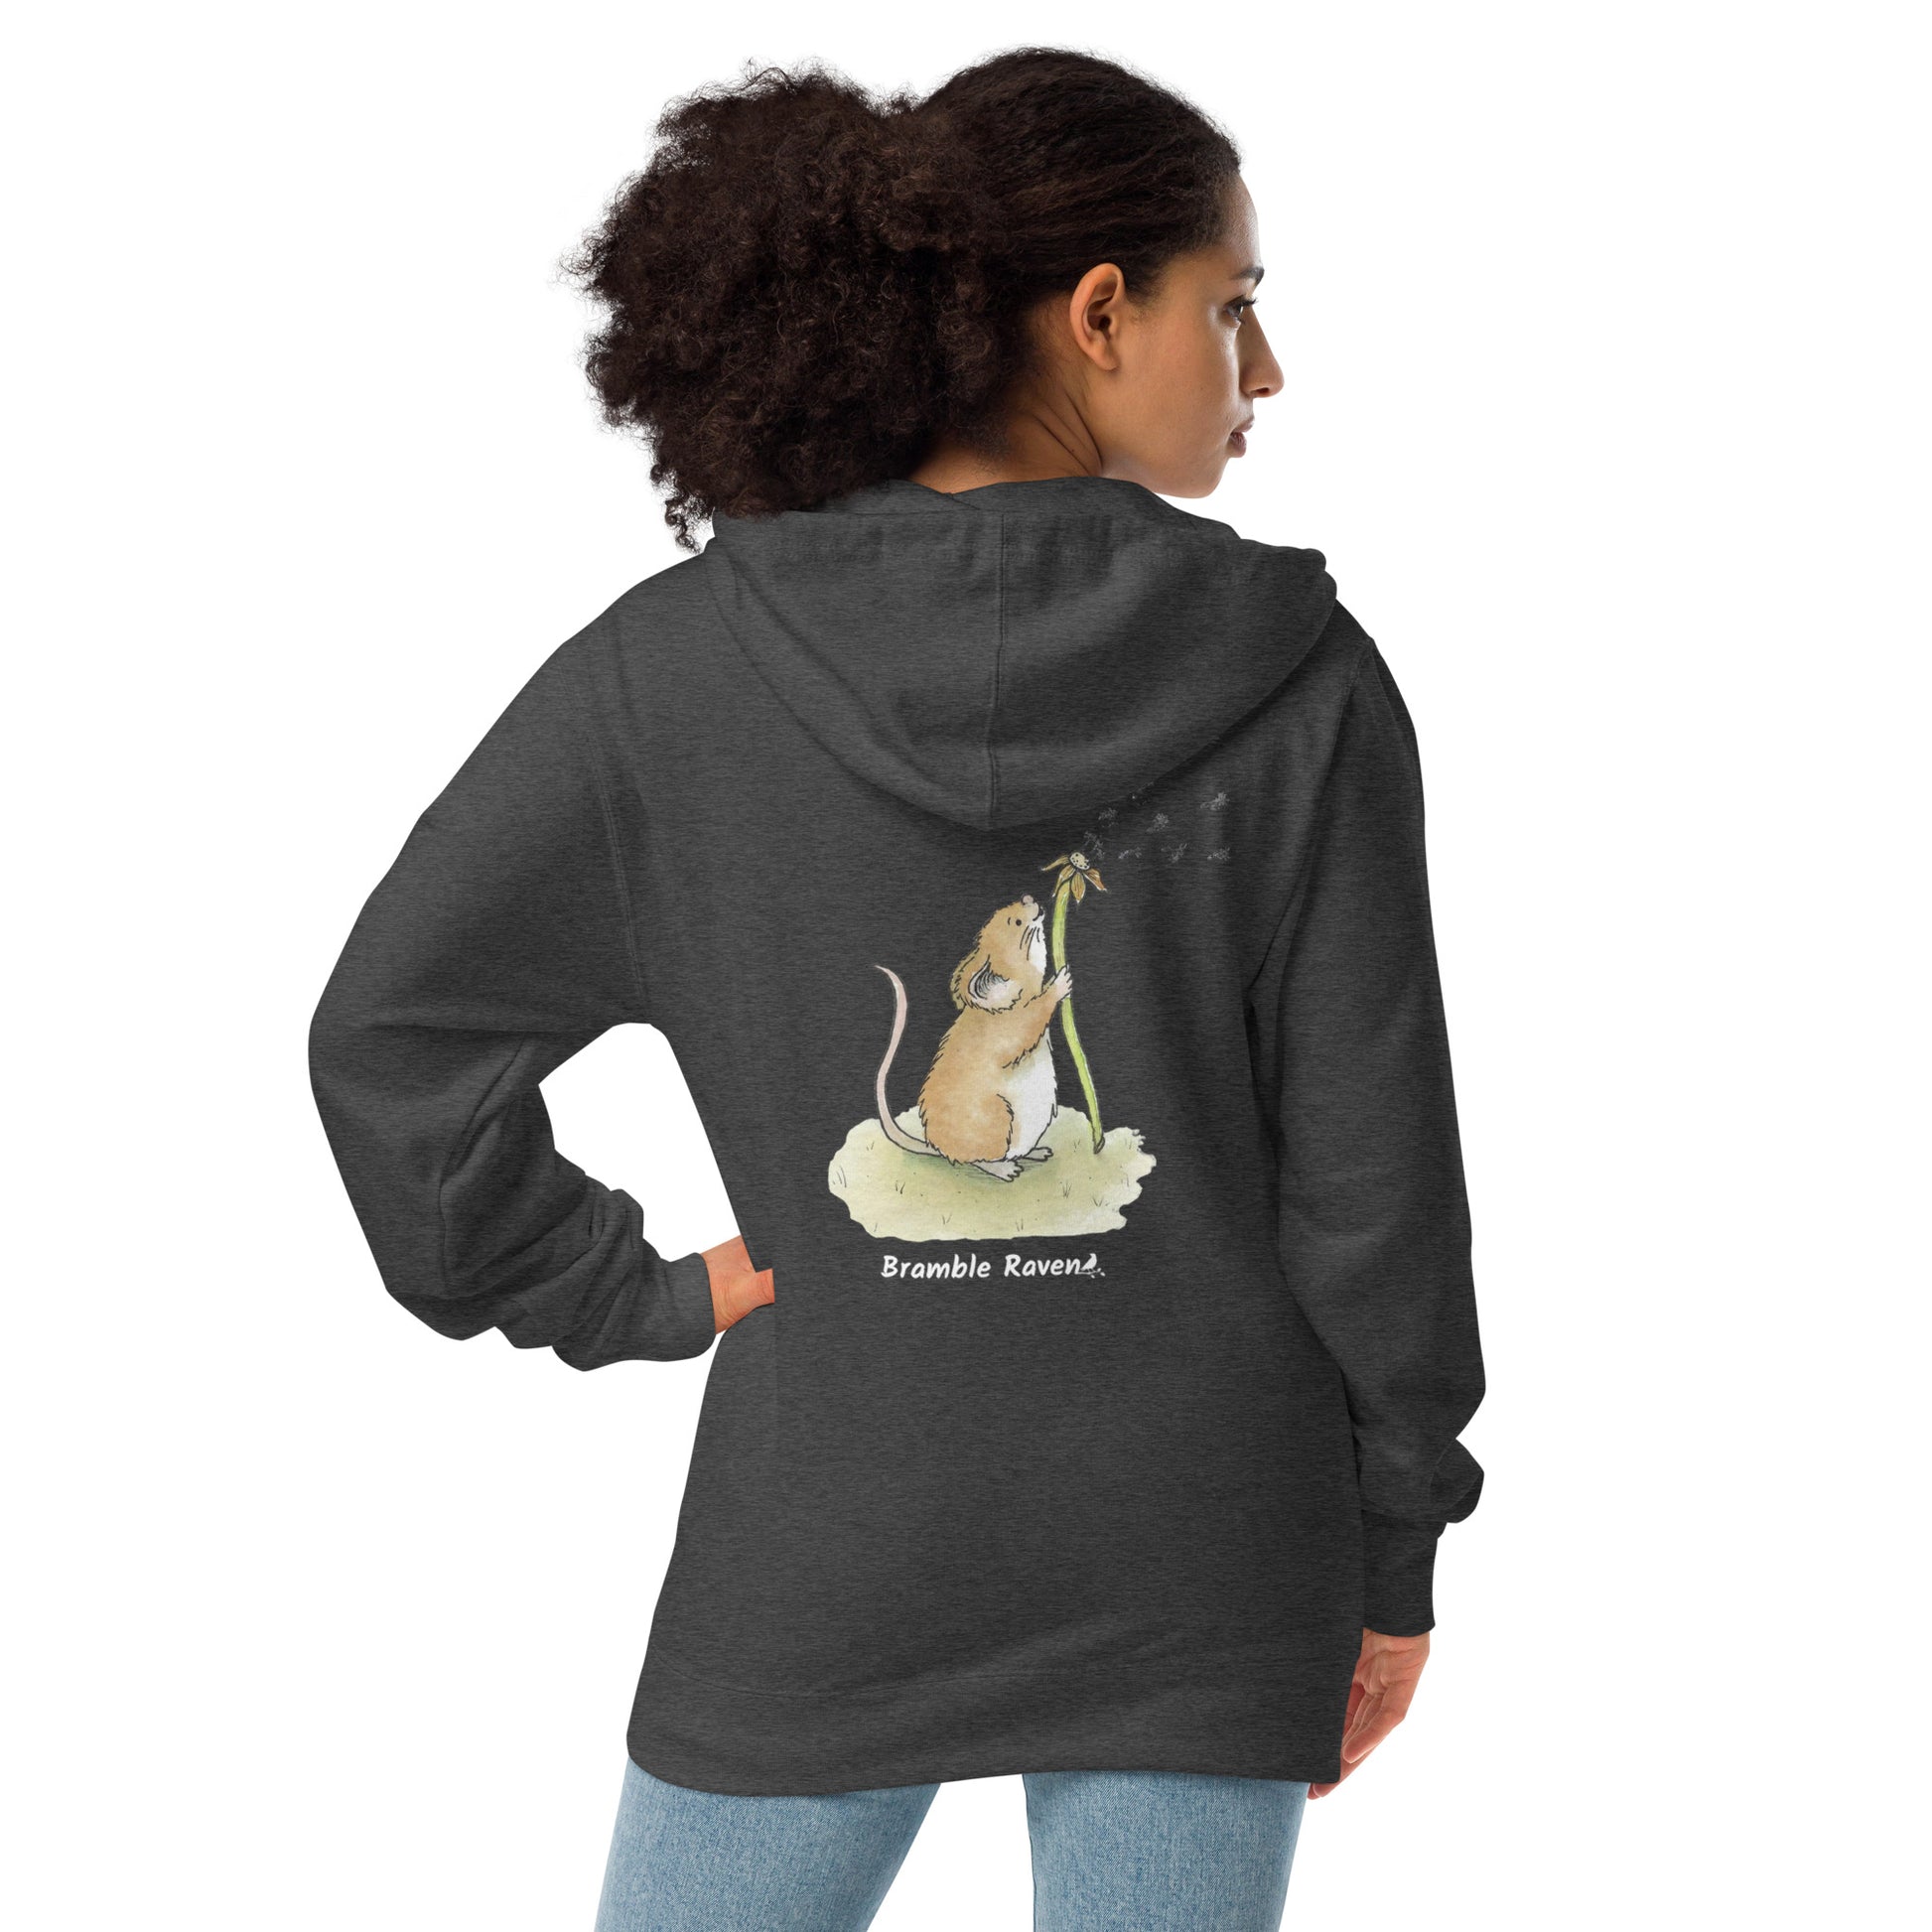 Dandelion wish design of cute watercolor mouse blowing dandelion seeds on the back of a charcoal gray fleece zip up hoodie shown on female model